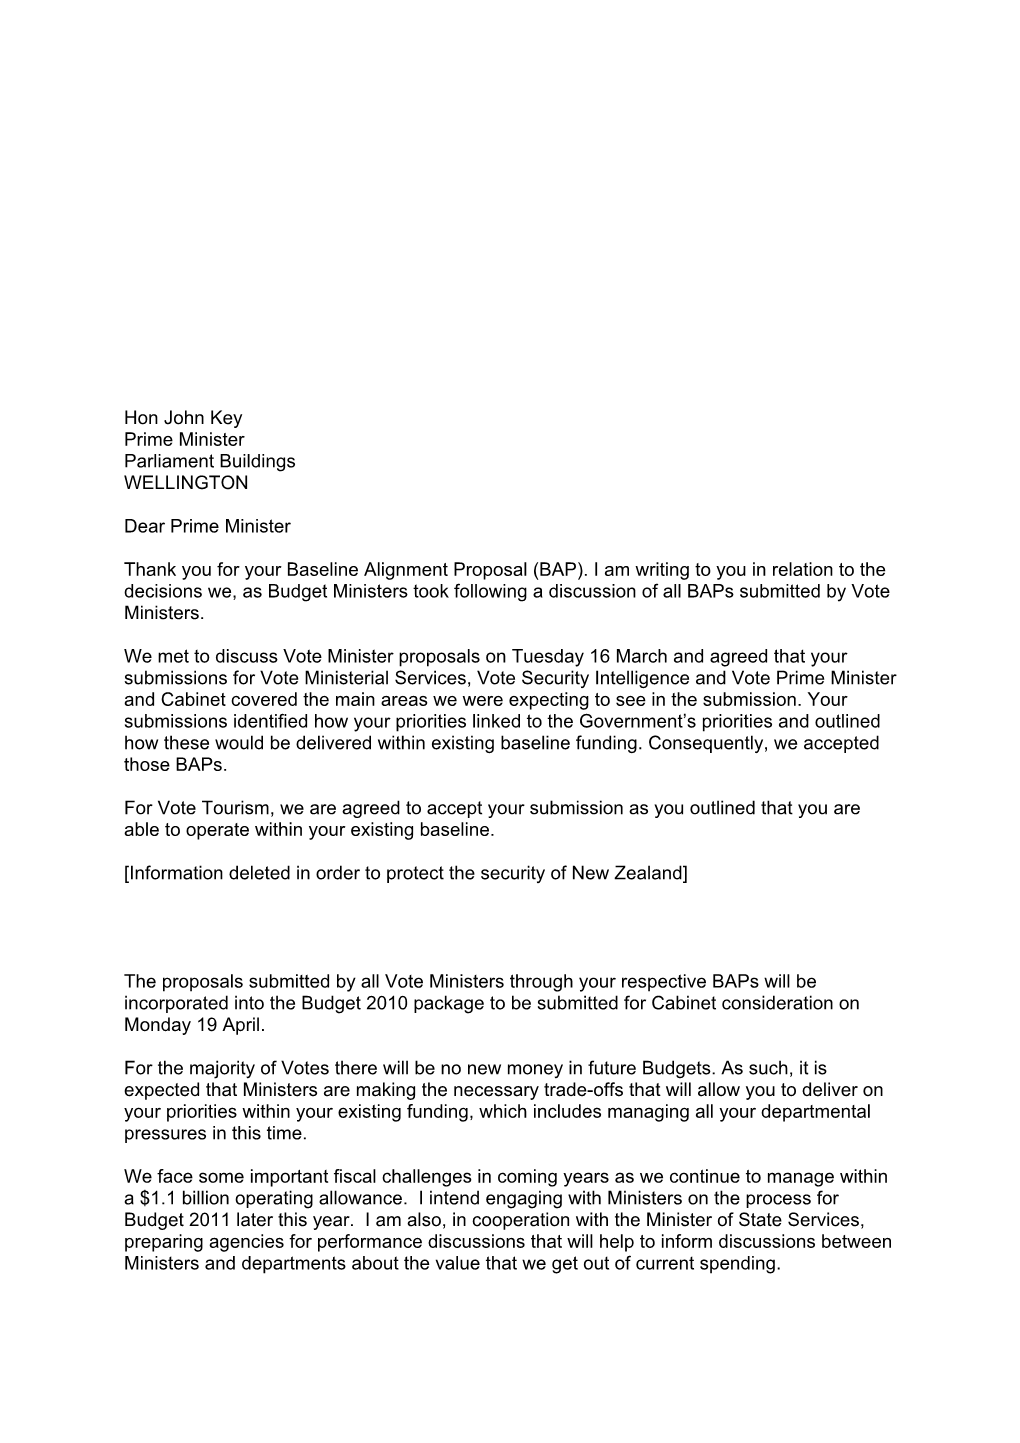 Letter from the Minister of Finance to Hon John Key Outlining Baseline Alignment Proposal Decisions on Votes Ministeria